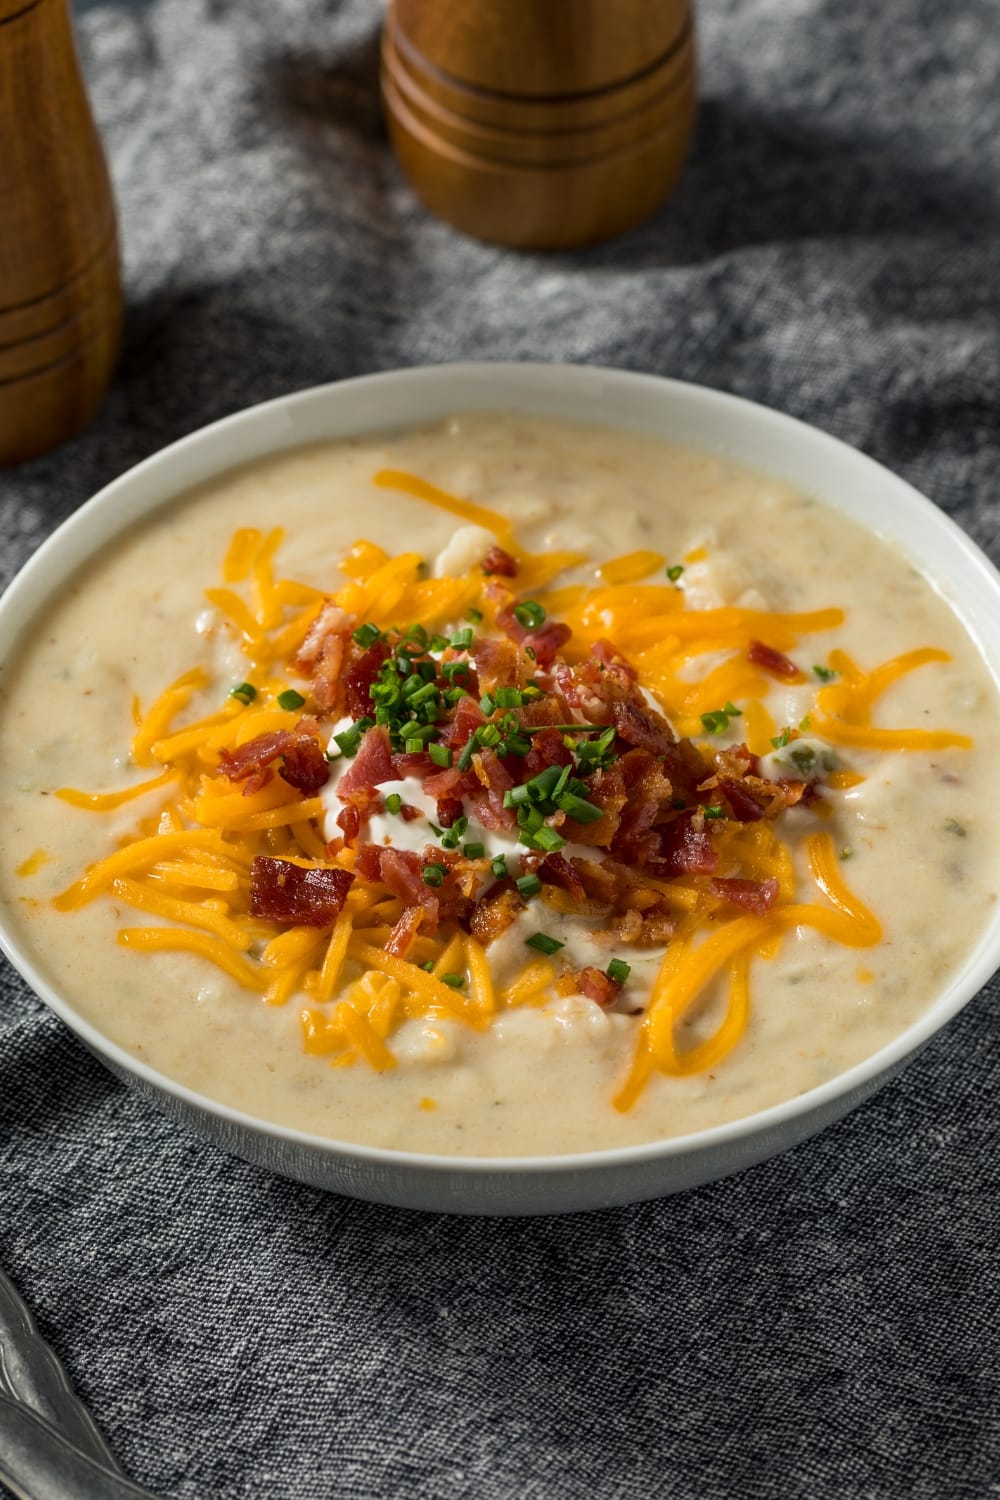 Bowl of Crockpot Potato Soup, Loaded With Toppings
